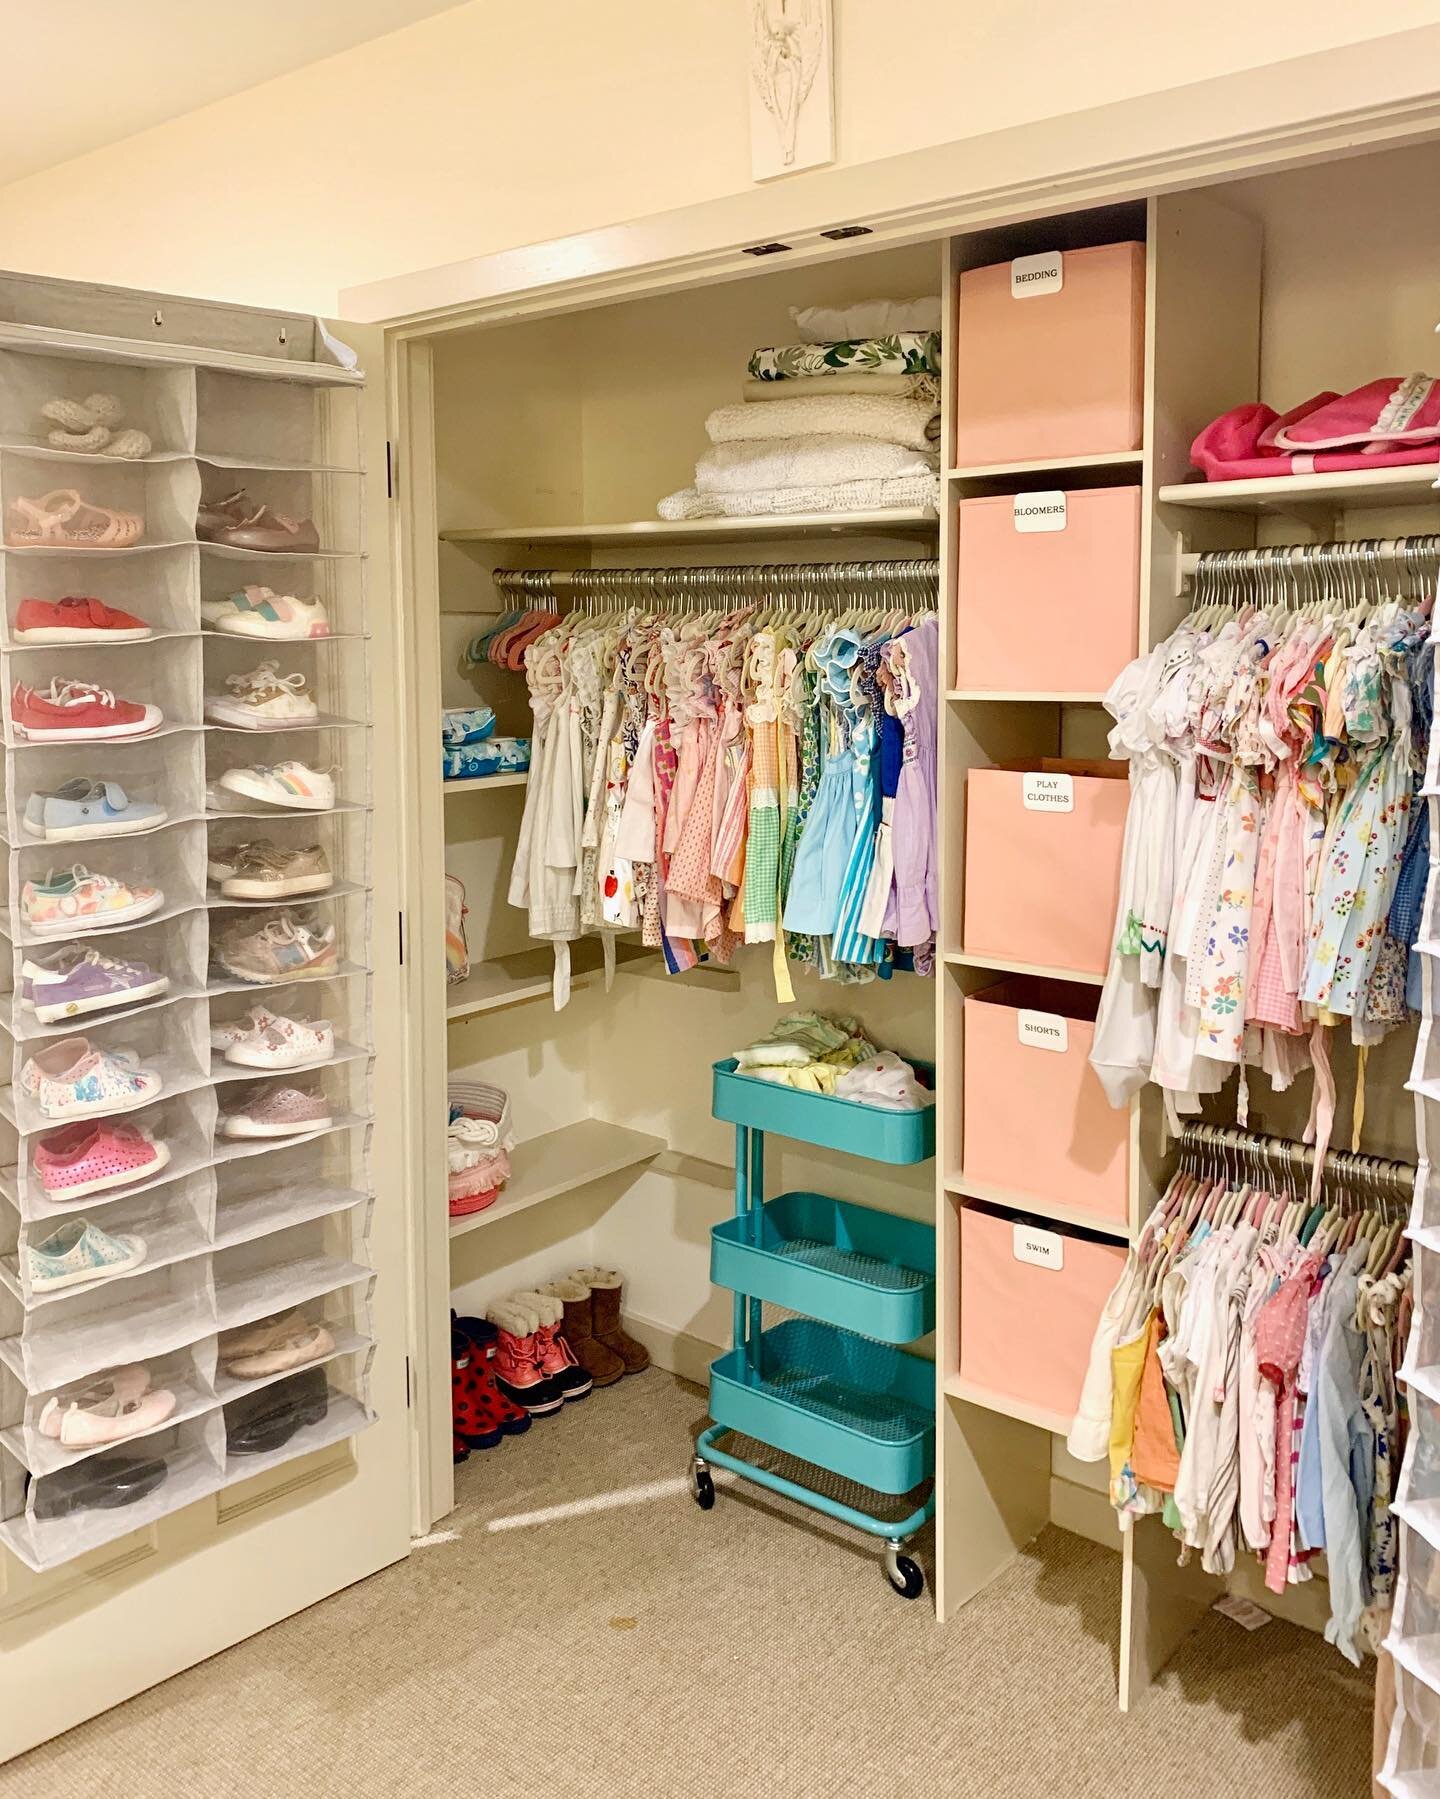 Clothes are color-coded, shoes are accessible and bins are labeled! A closet that is just as organized as it is cute ✔️